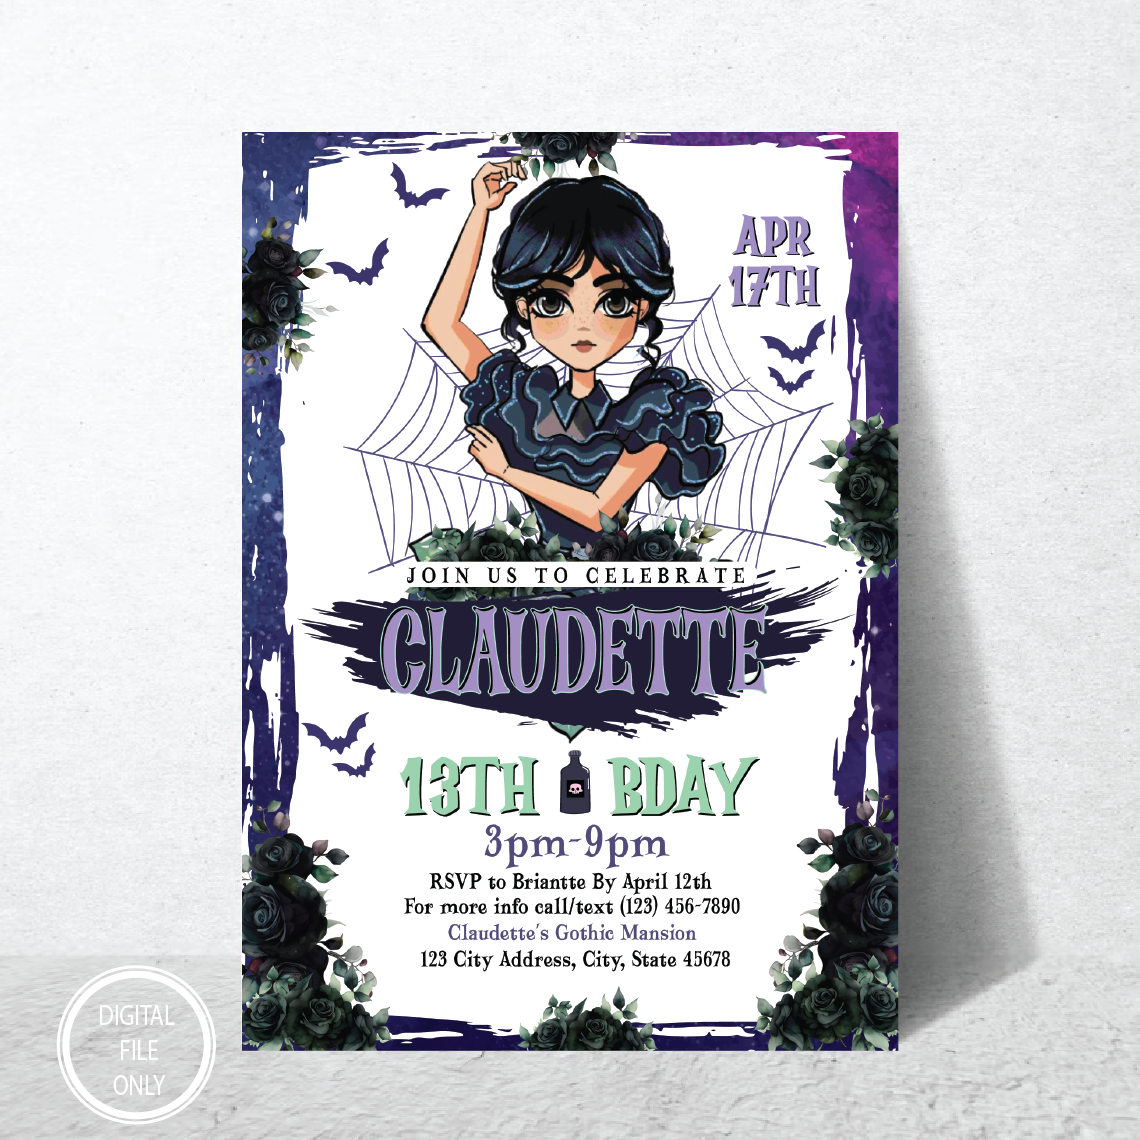 Personalized File Wednesday Invite, Wednesday Invitation Birthday, Addams Family Invite, Wednesday Party, Printable Invitation, Instant Download, 5x7 PNG File Only